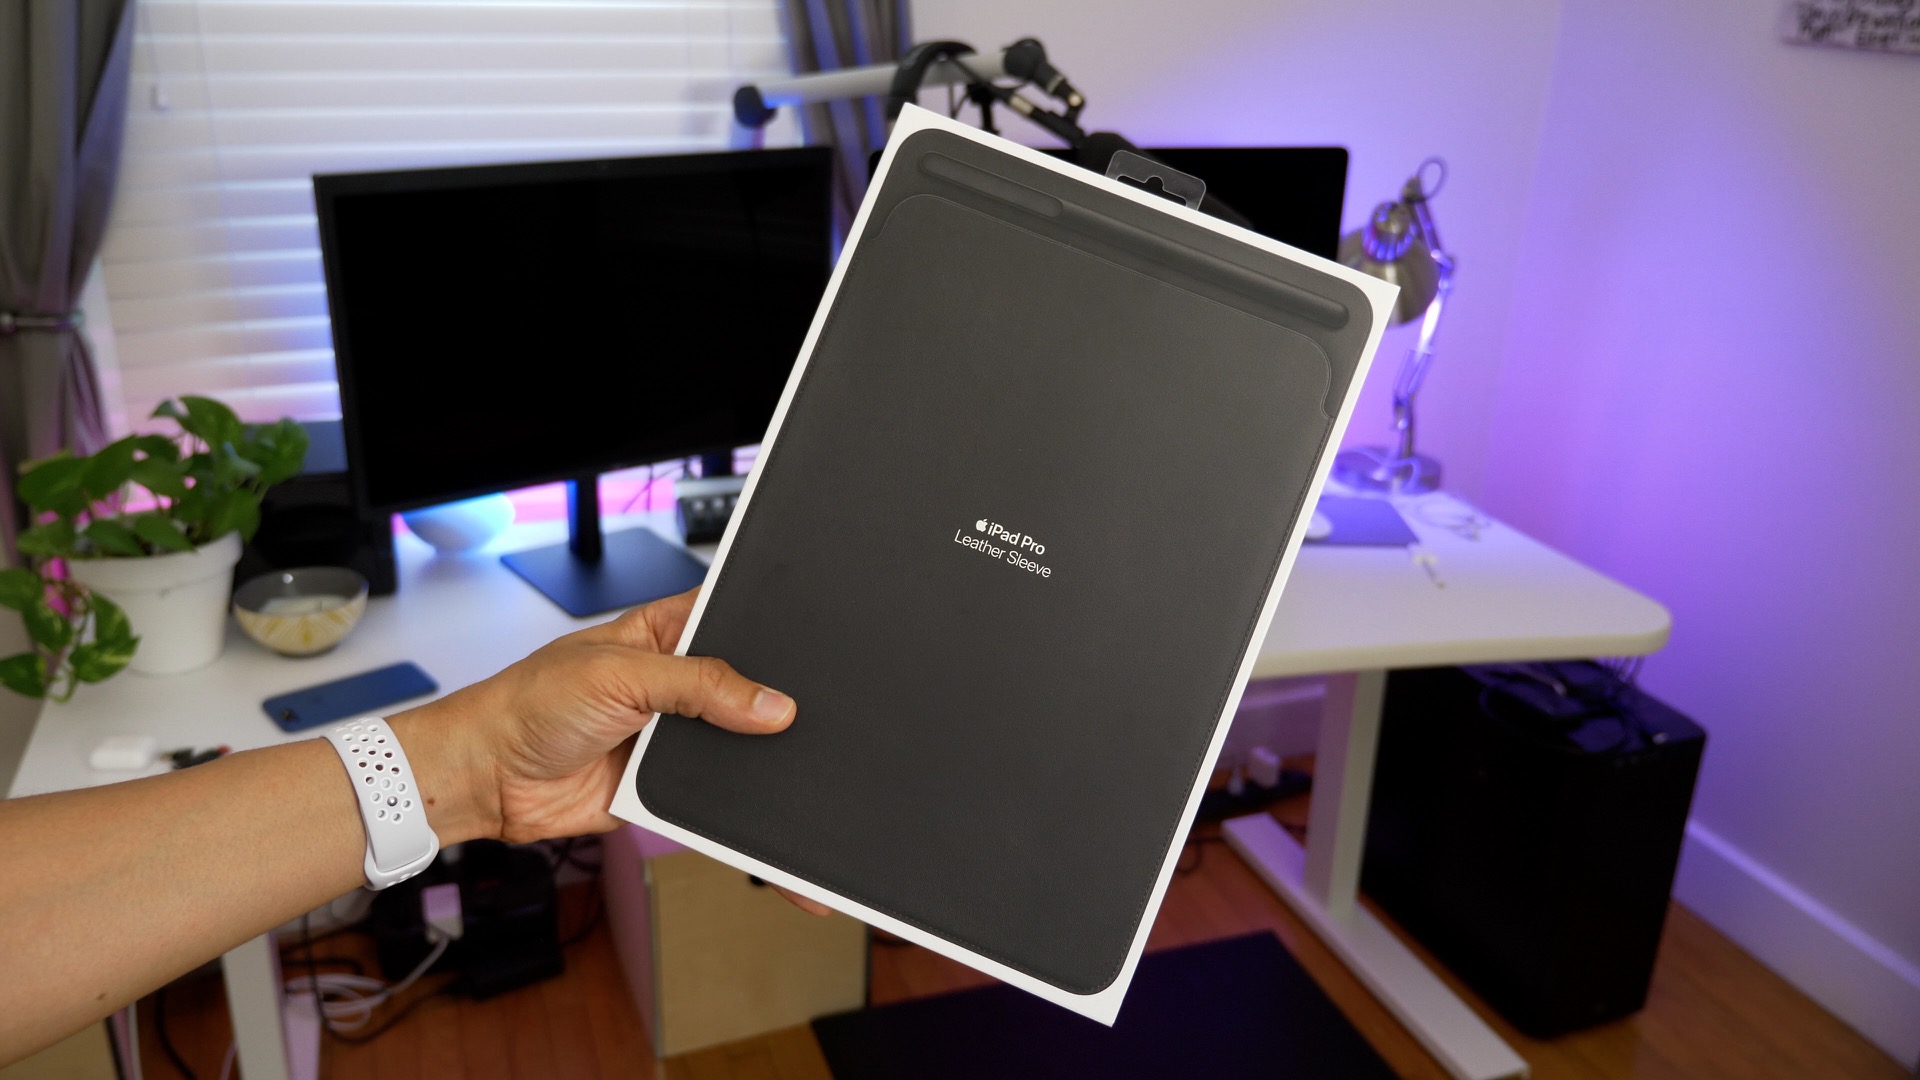 Hands-on: Leather Sleeve a luxury storage solution for iPad Pro [Video] - 9to5Mac